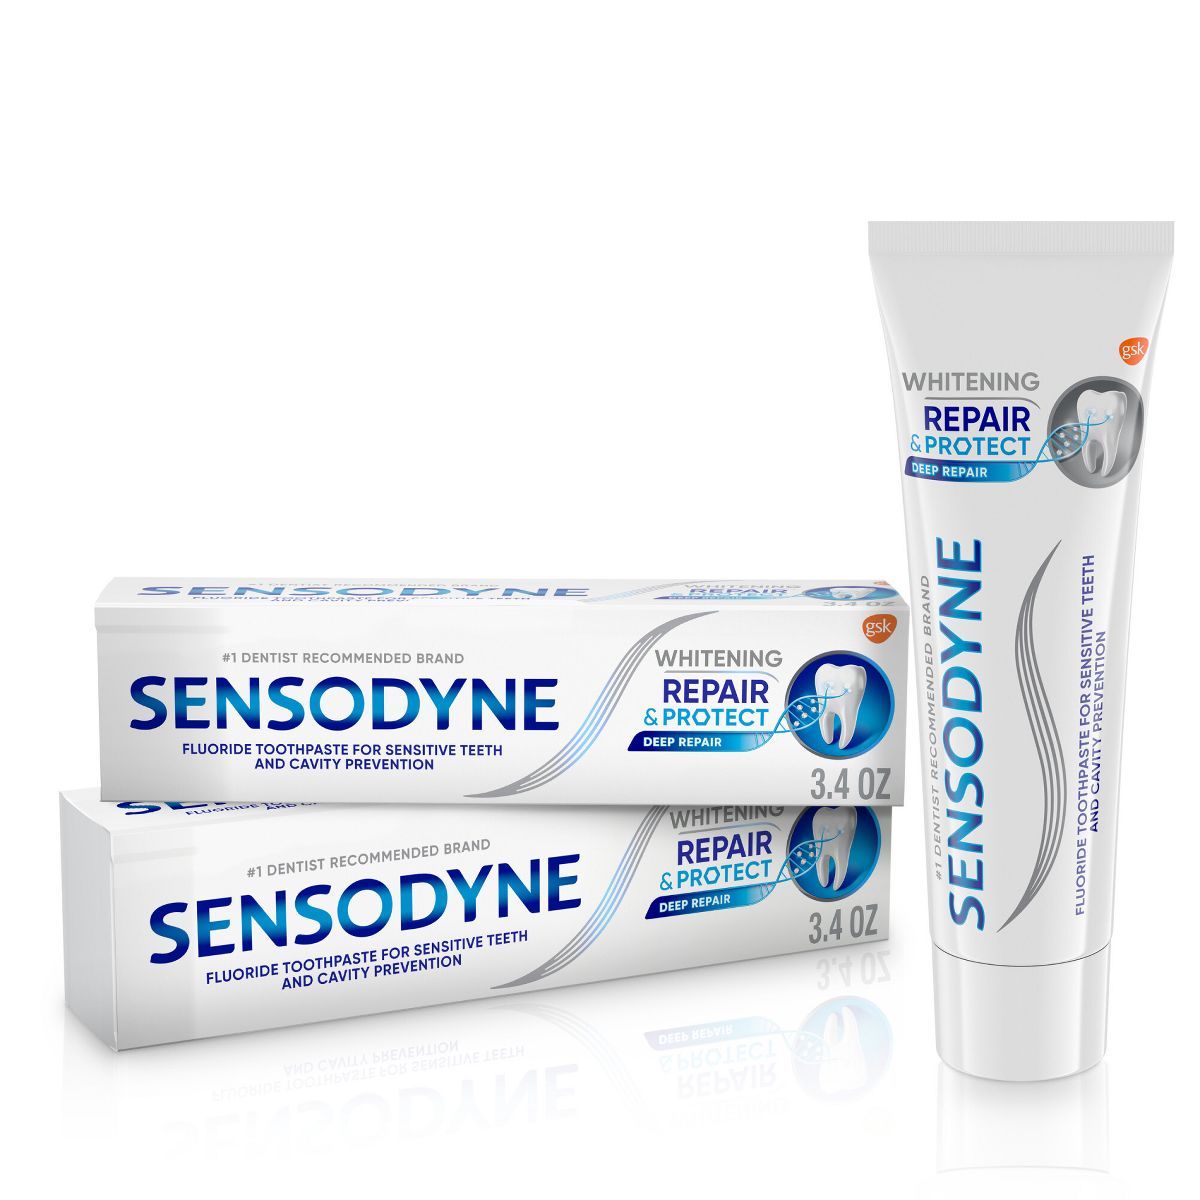 Sensodyne Whitening Repair and Protect Toothpaste for Sensitive Teeth - 3.4oz | Target